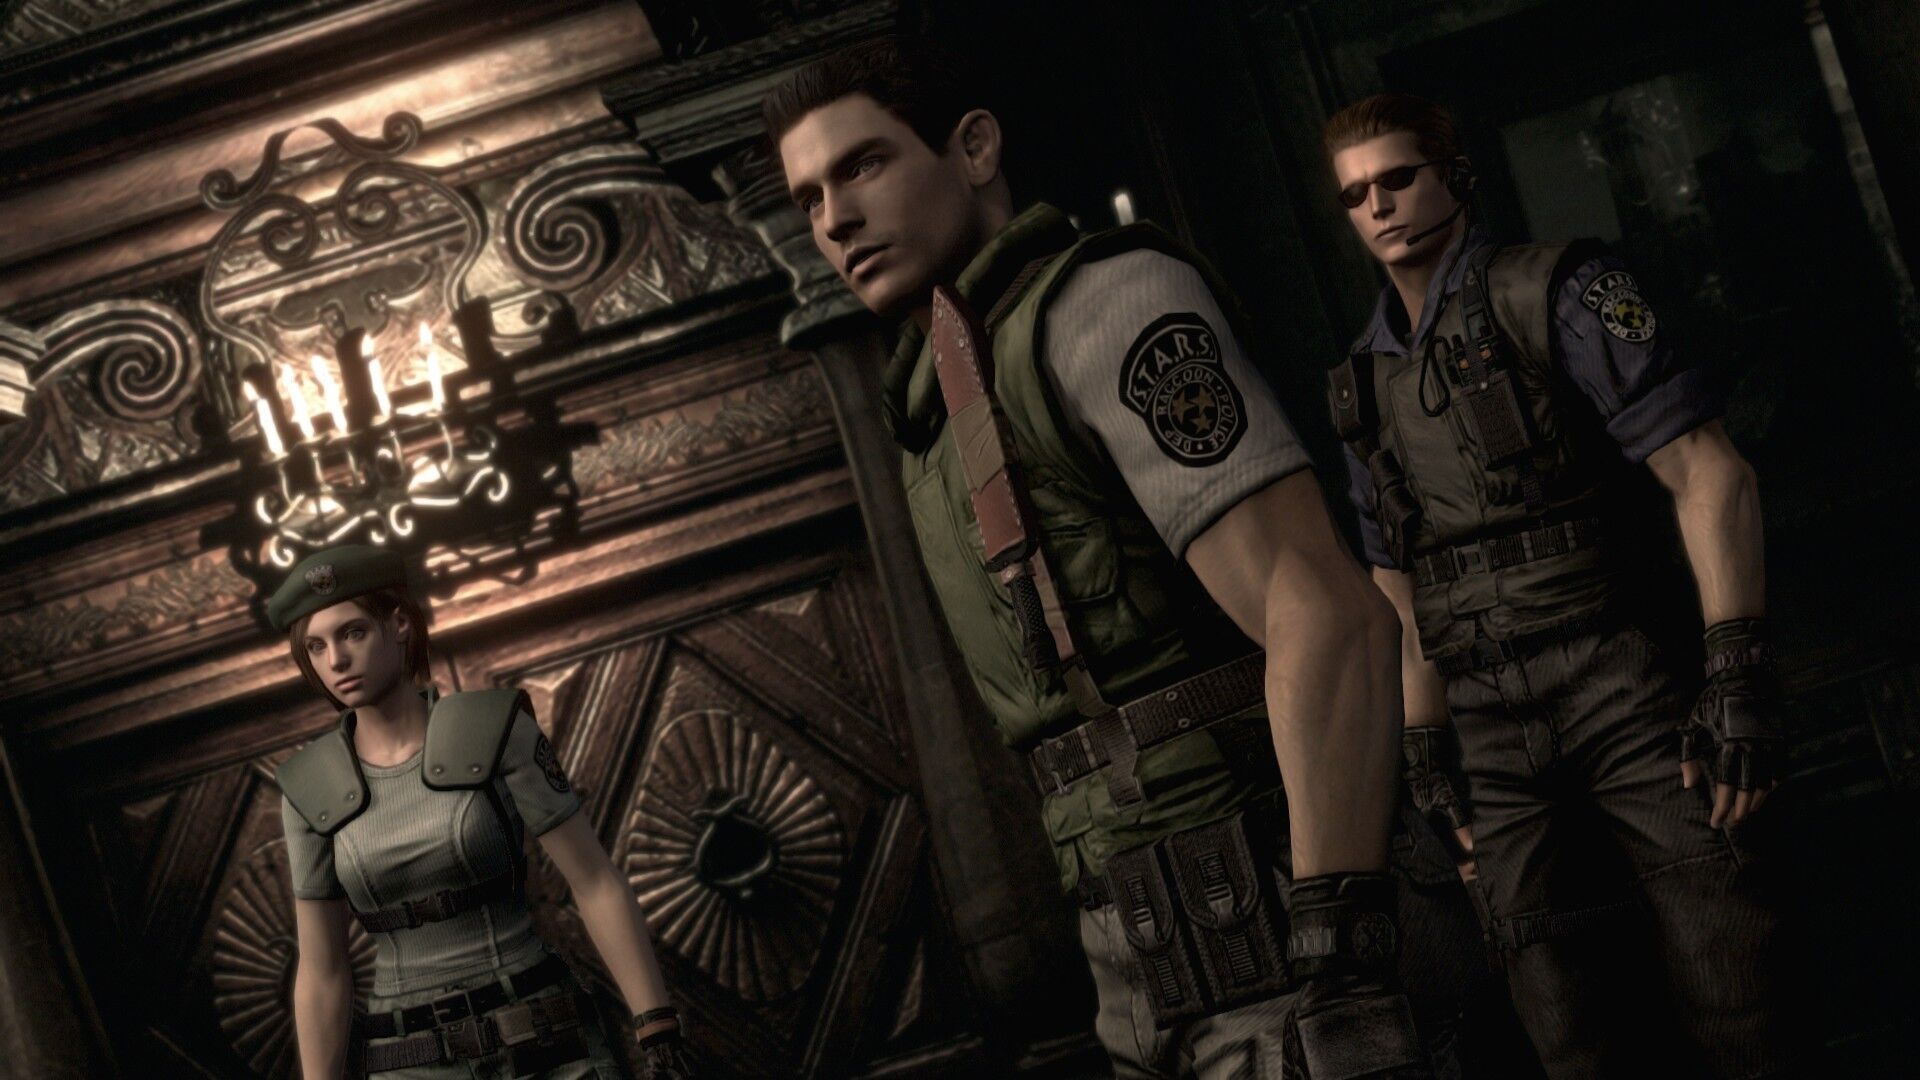 https://static.wikia.nocookie.net/residentevil/images/a/ab/REmake_screen.jpg/revision/latest/scale-to-width-down/1920?cb=20170604154127